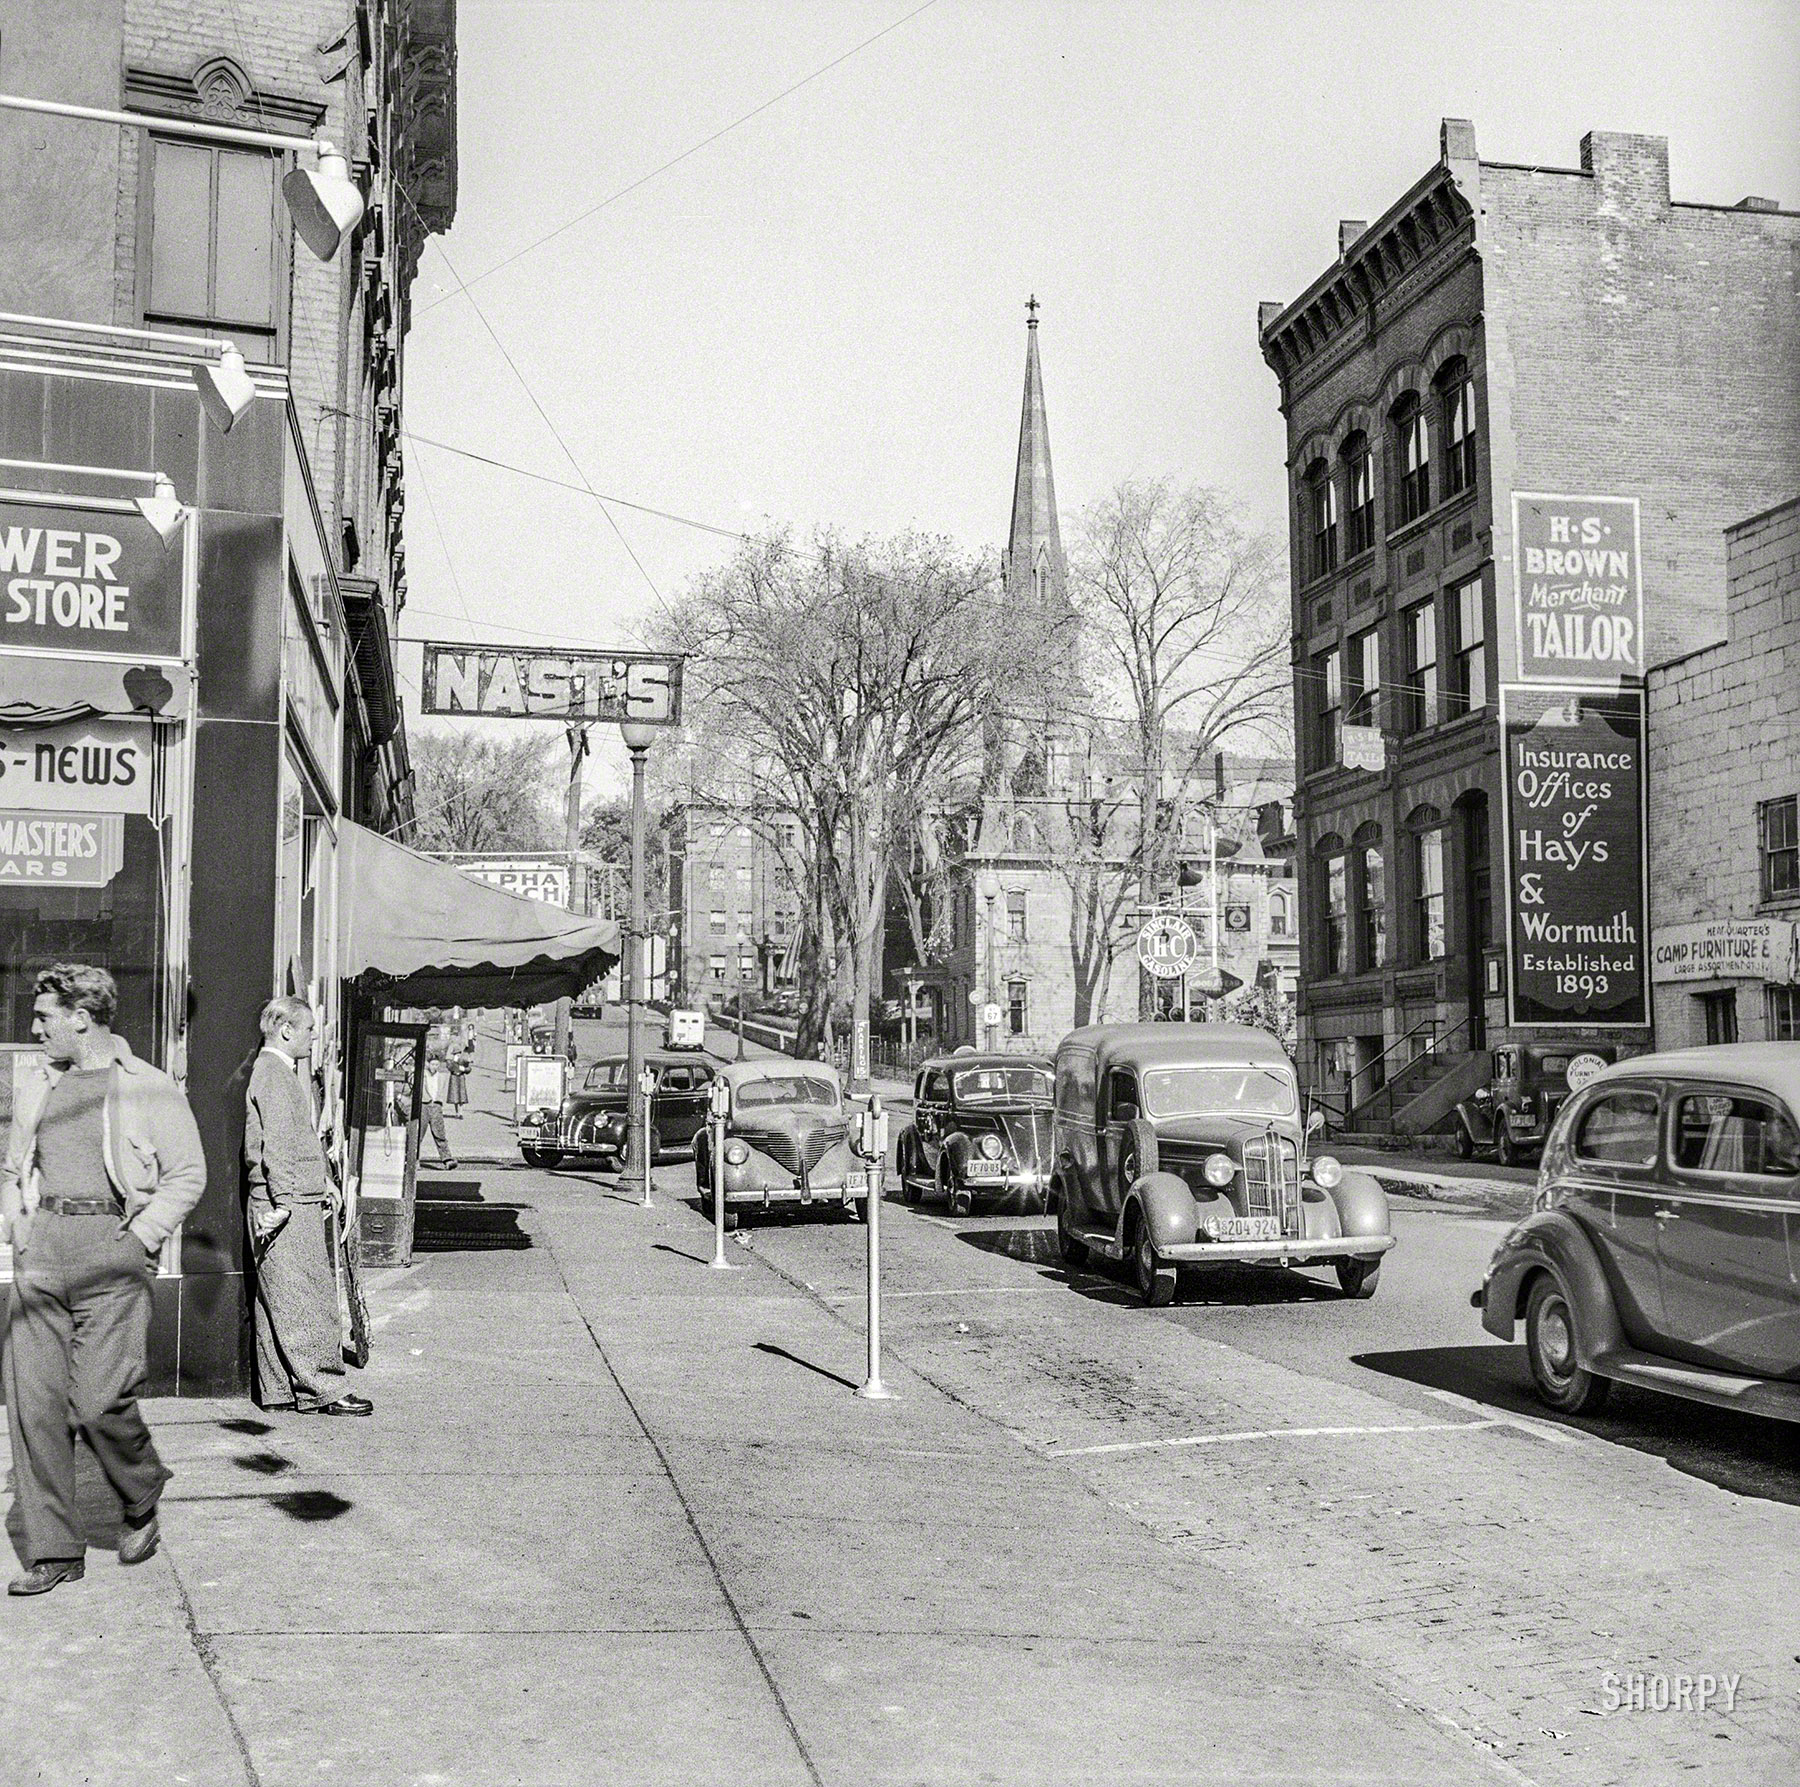 October 1941. "Amsterdam, New York. Street scene." (Meanwhile, back in Europe and Japan ... ) Medium format negative by John Collier. View full size.